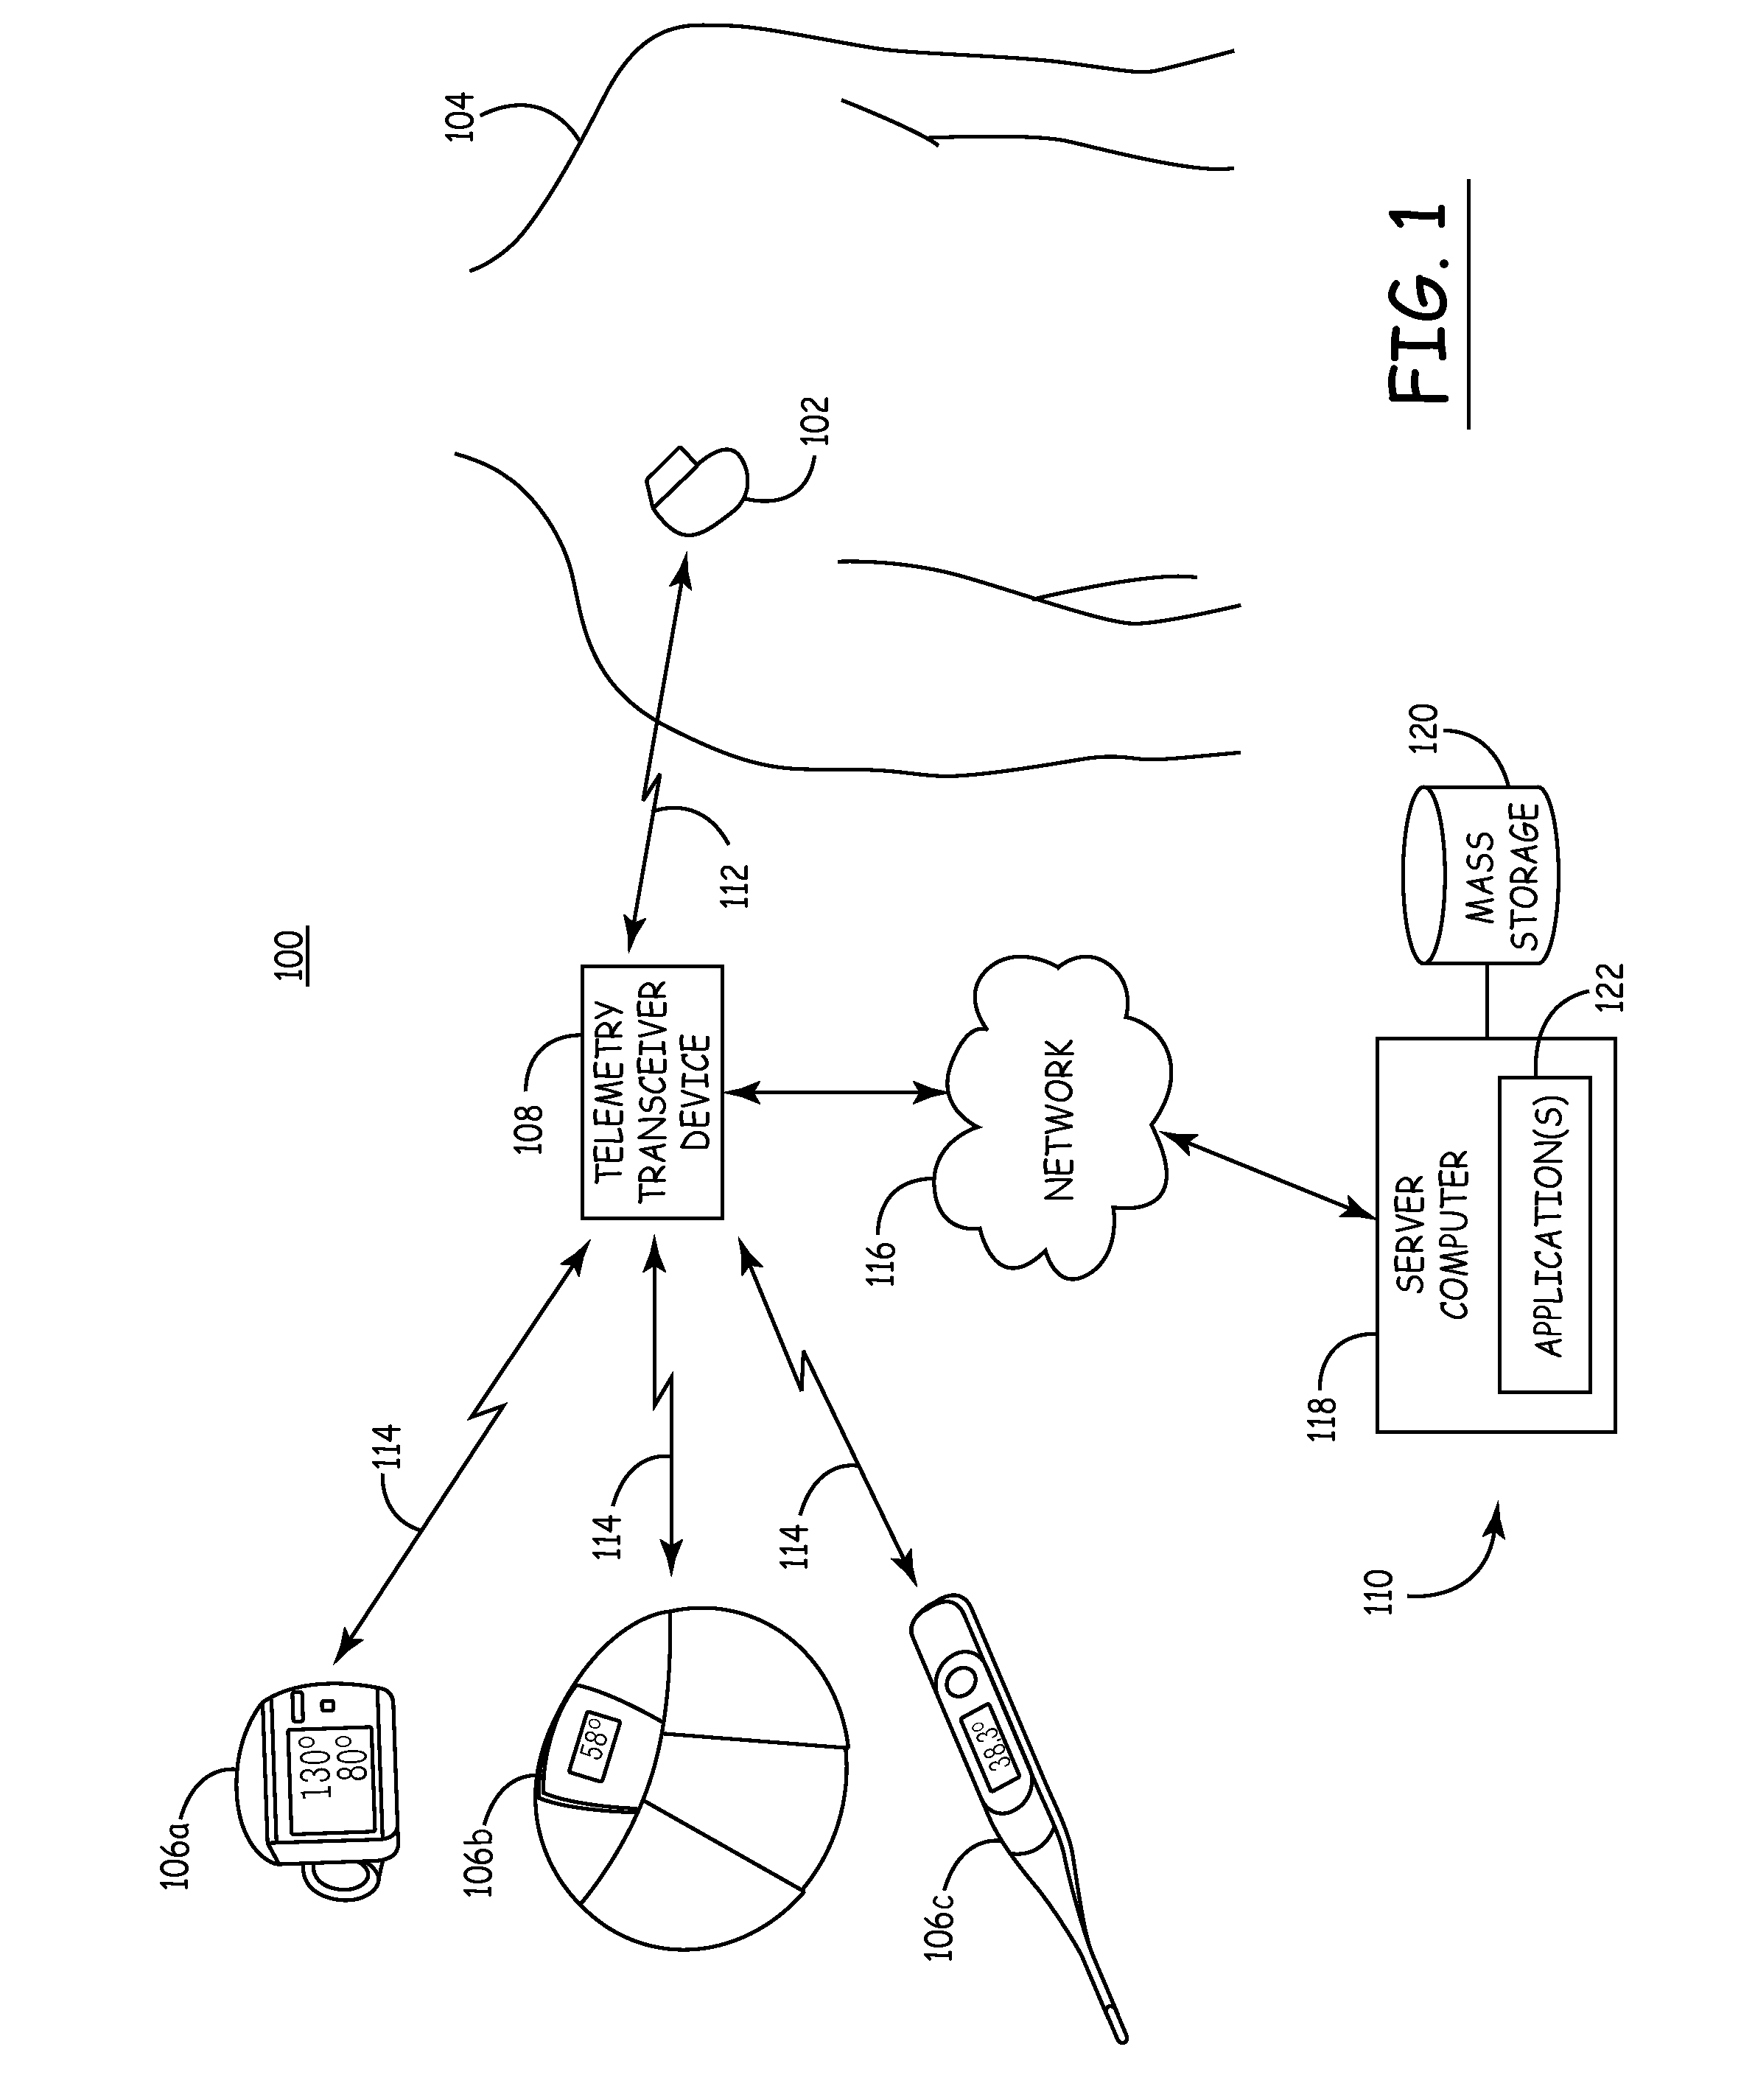 Telemetry of external physiological sensor data and implantable medical device data to a central processing system